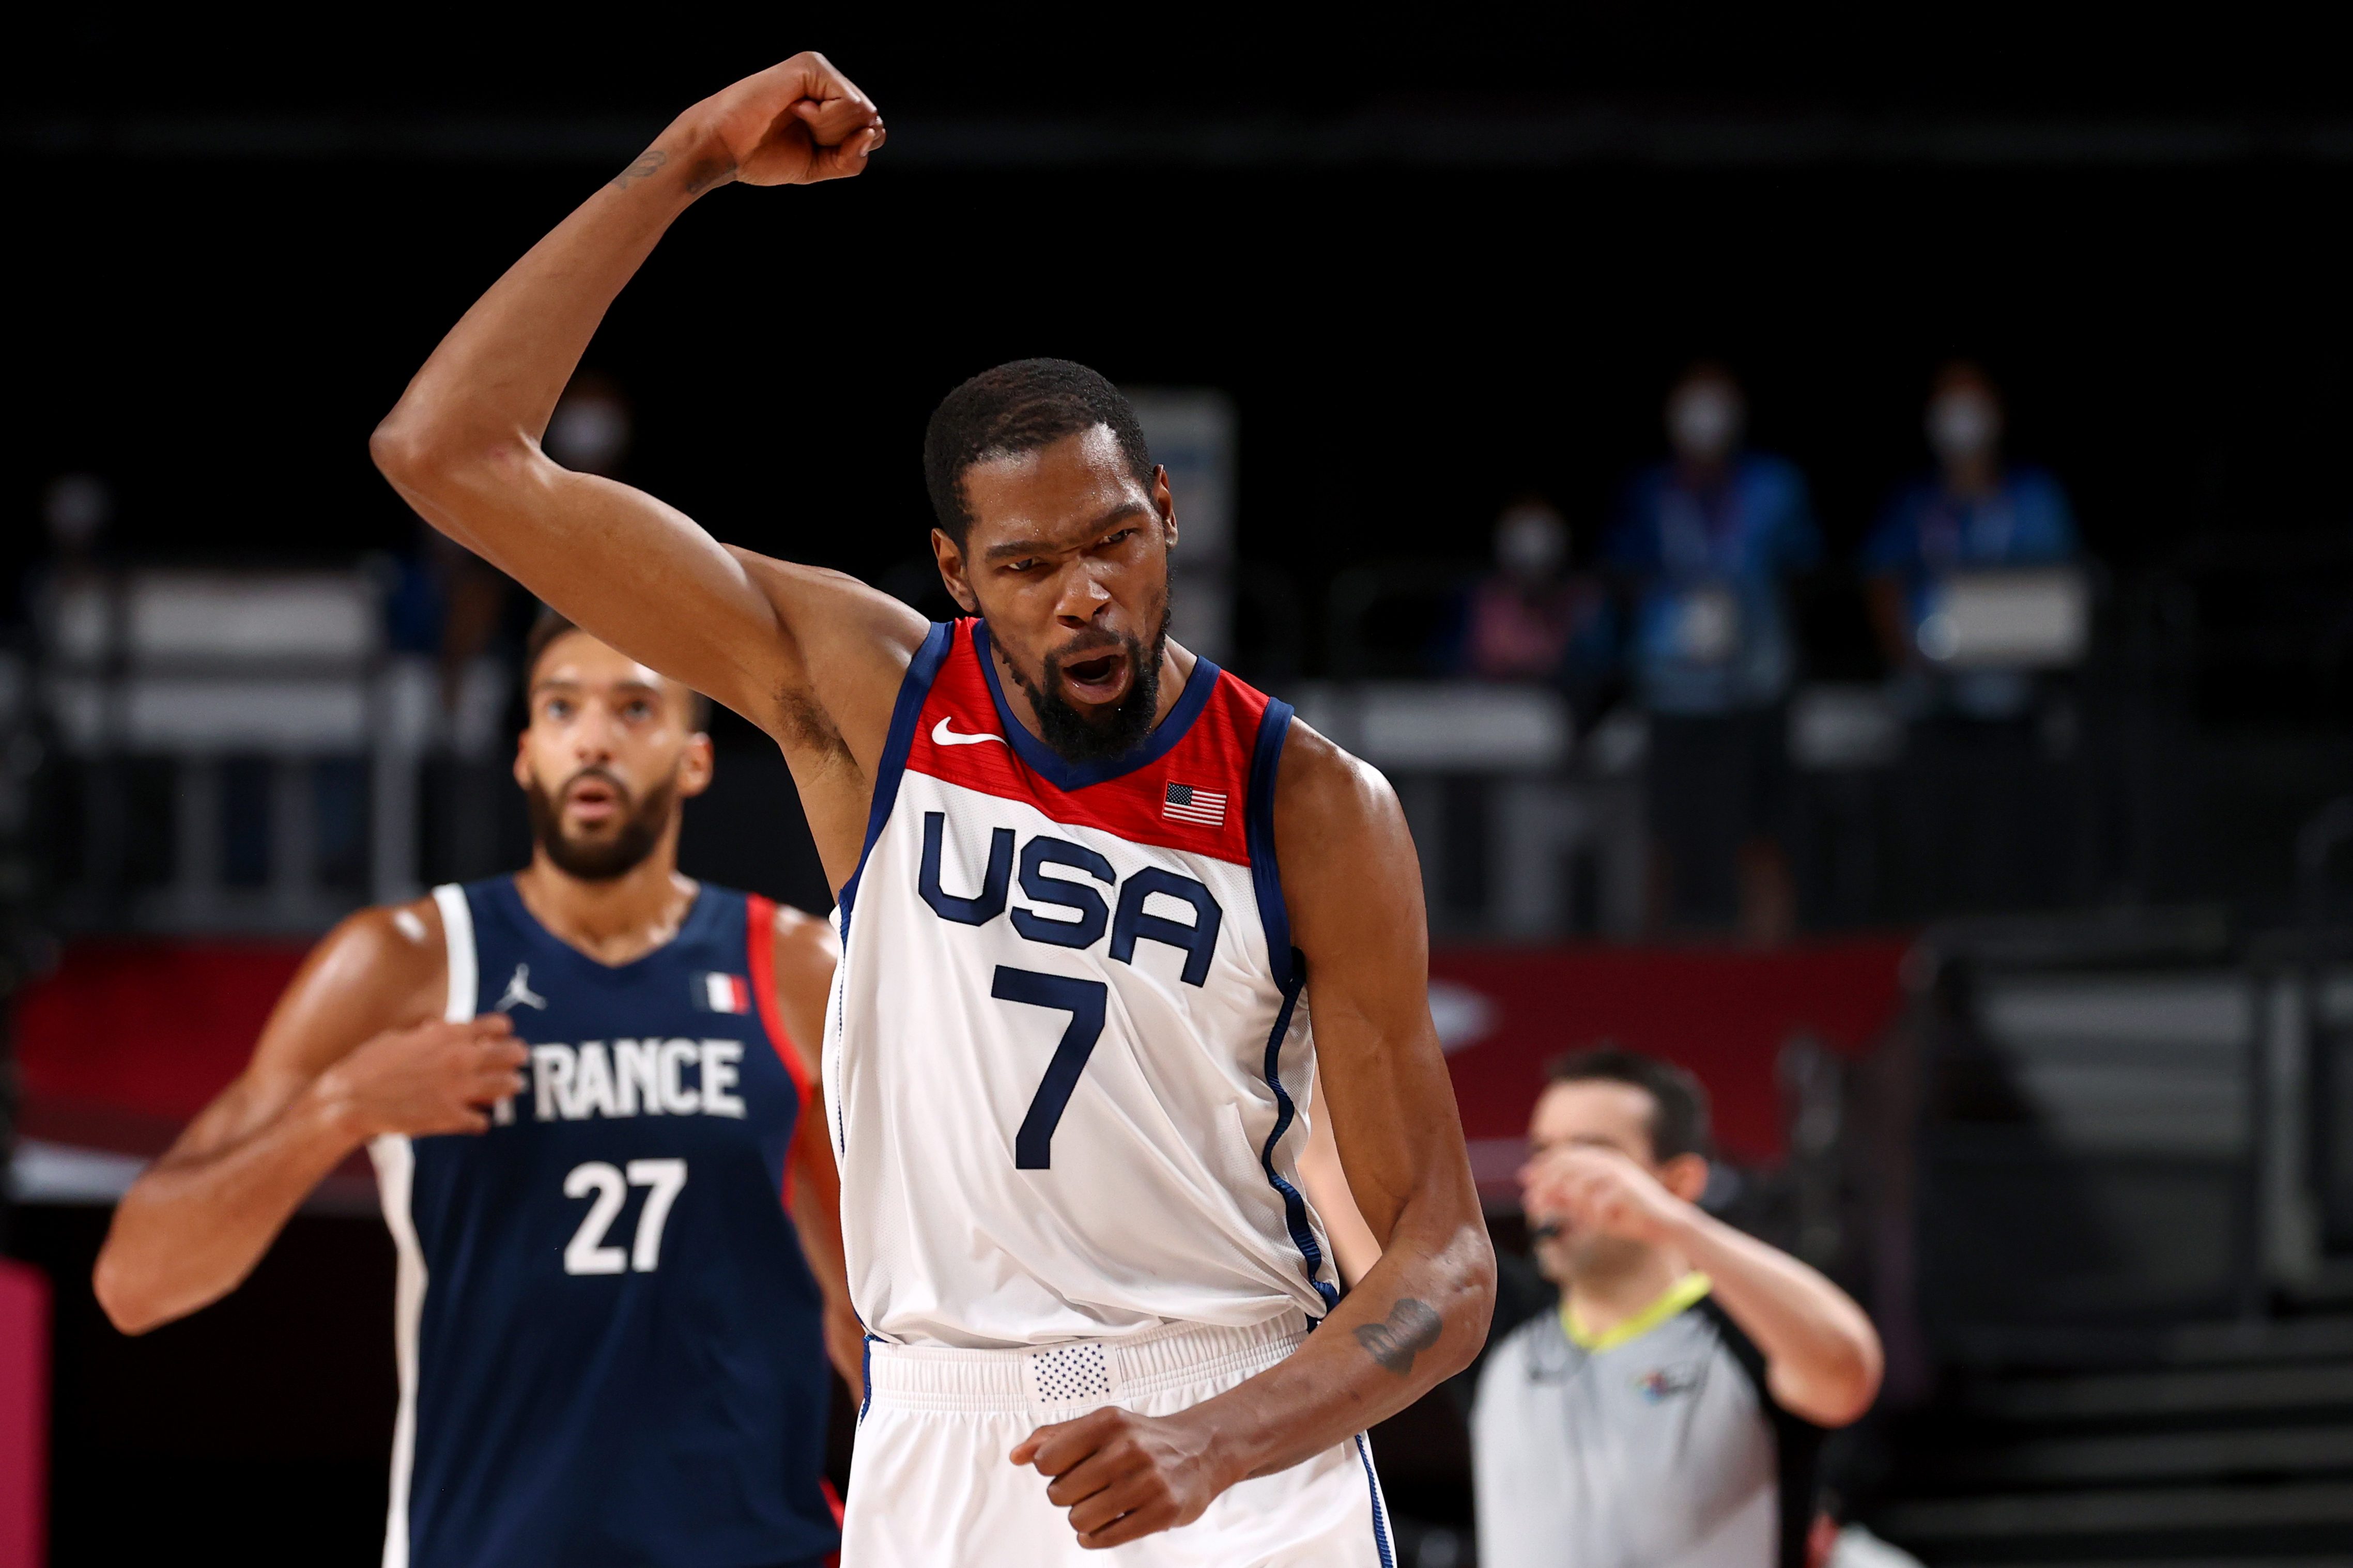 USA avenges loss to France, wins 4th straight Olympic basketball gold